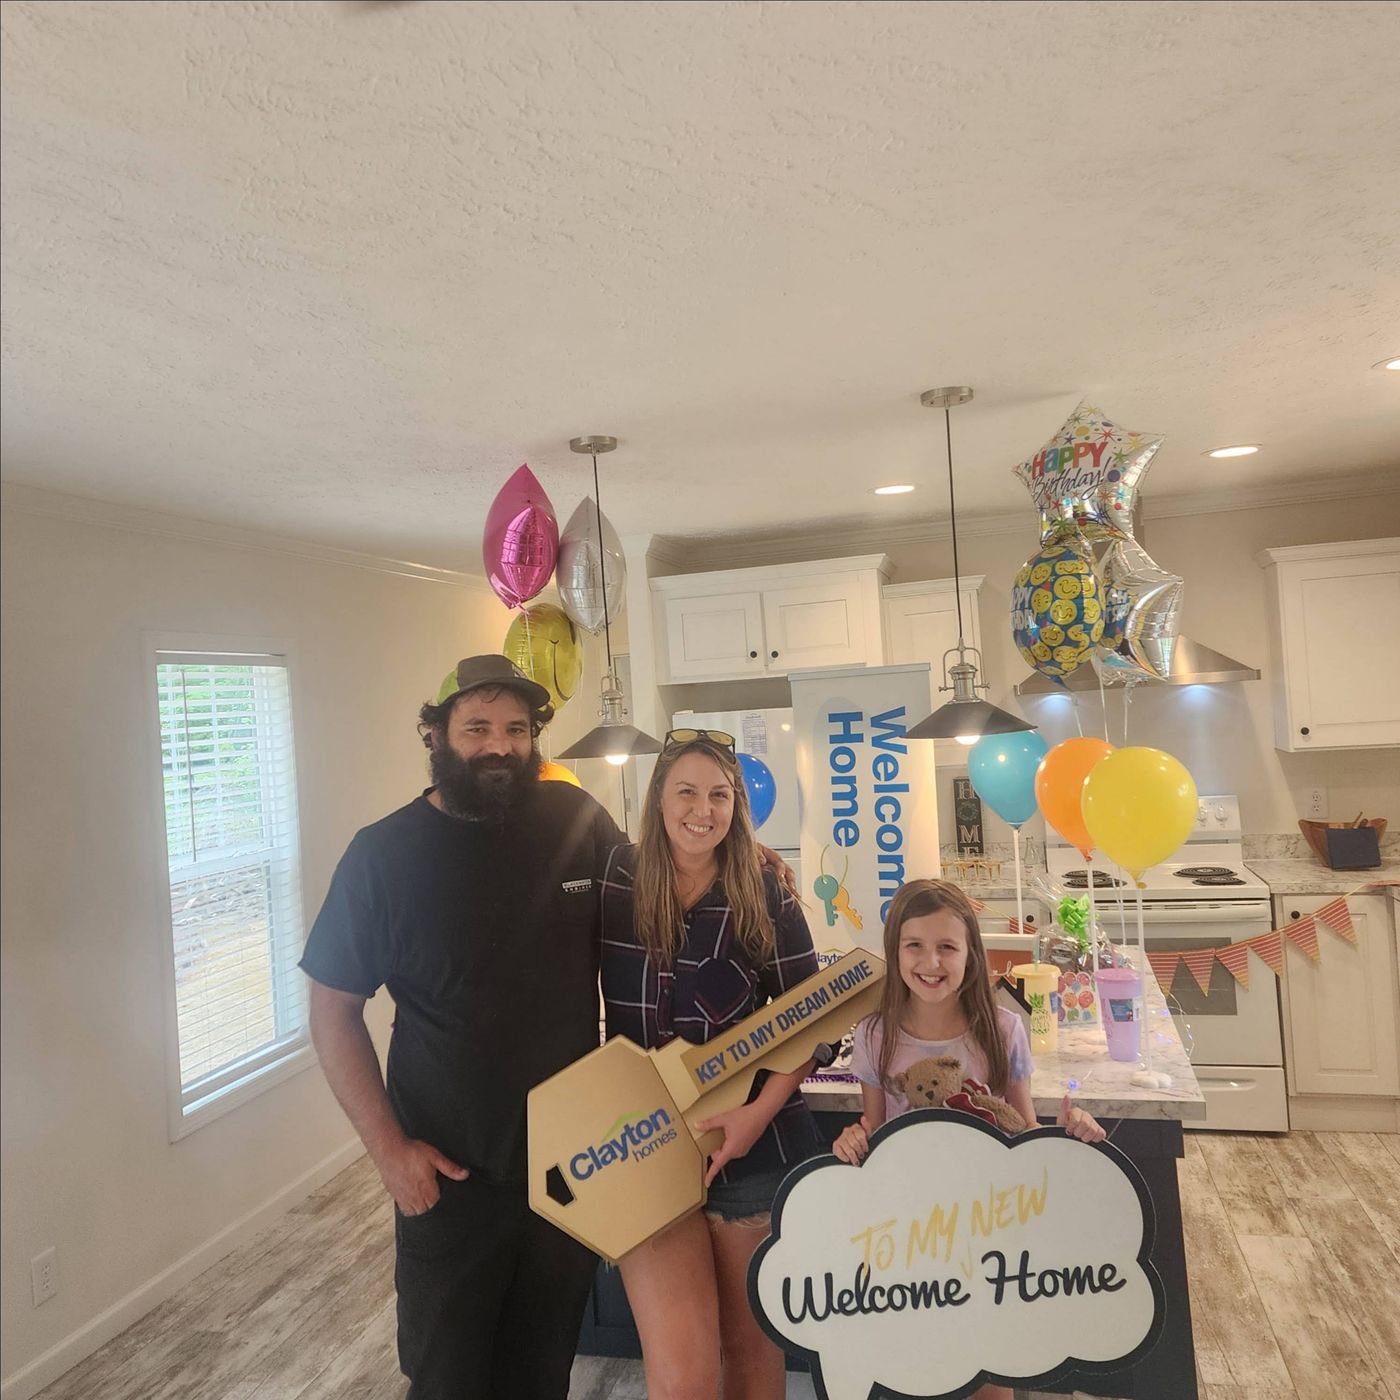 HEATHER L. welcome home image